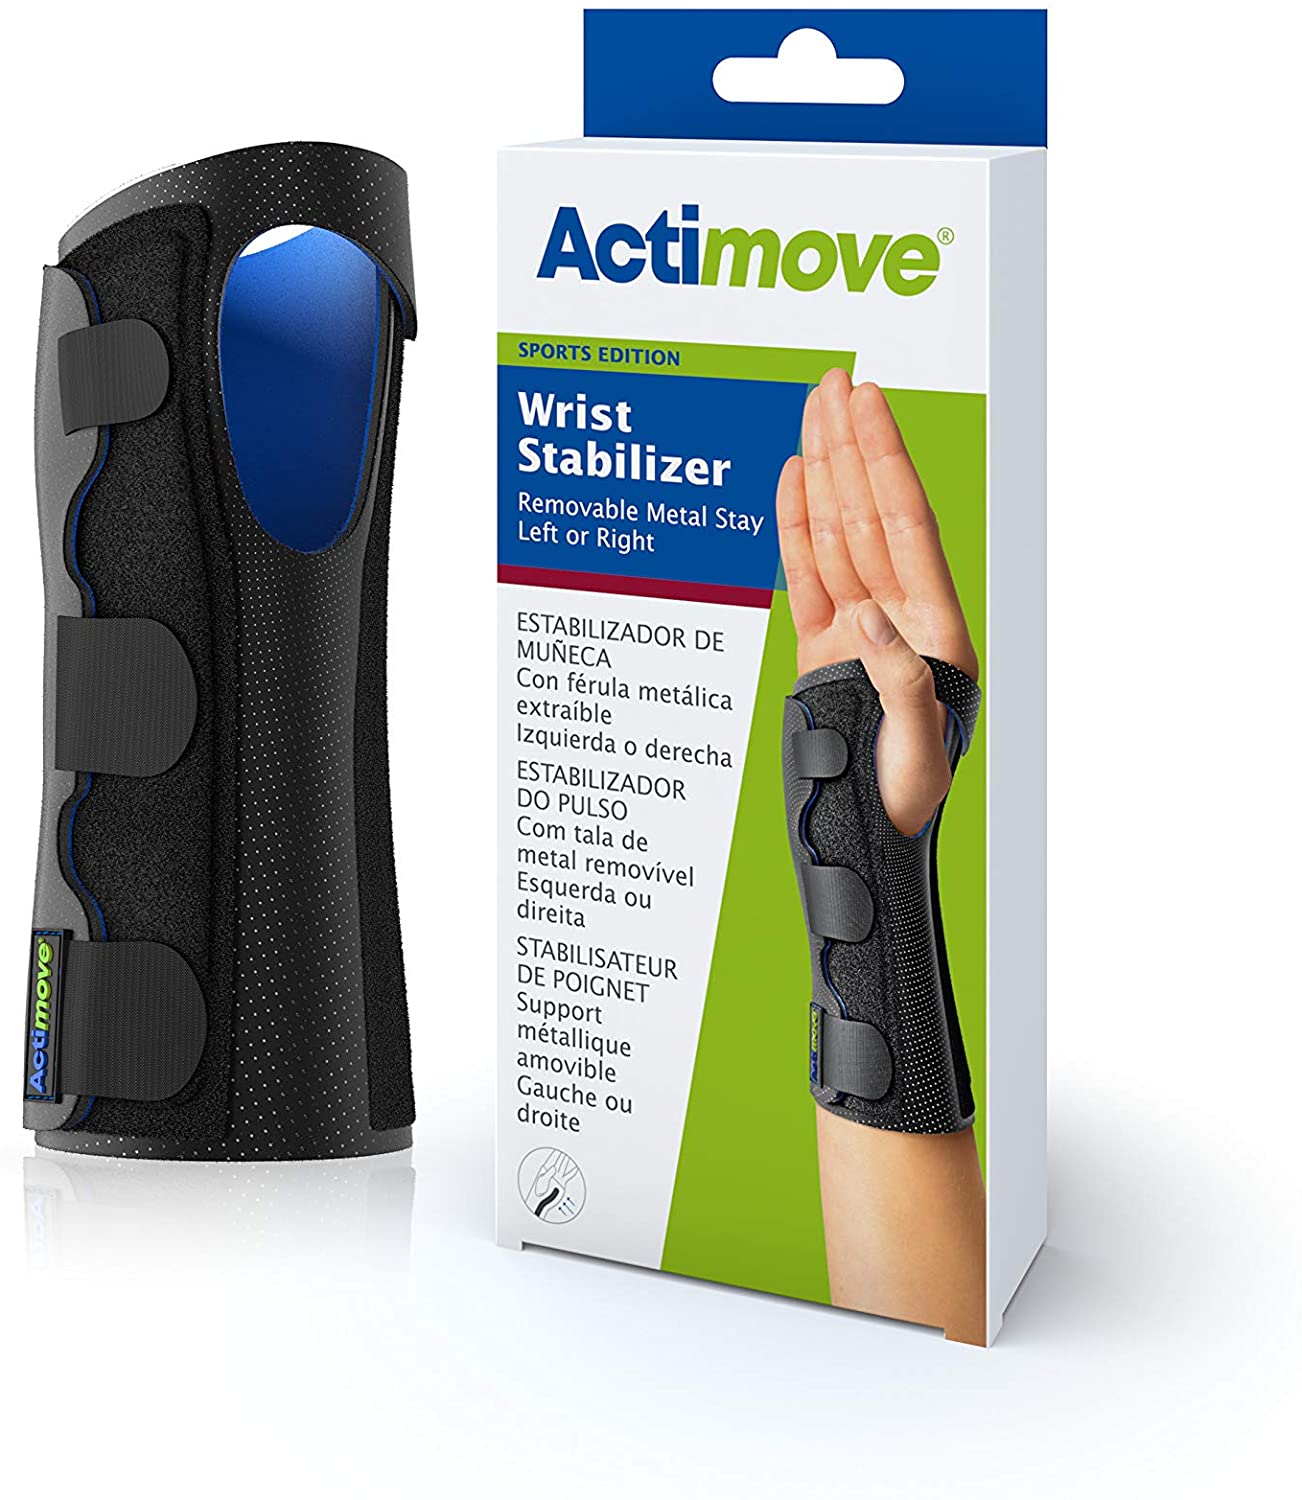 Provides immobilization for weak or injured wrists.